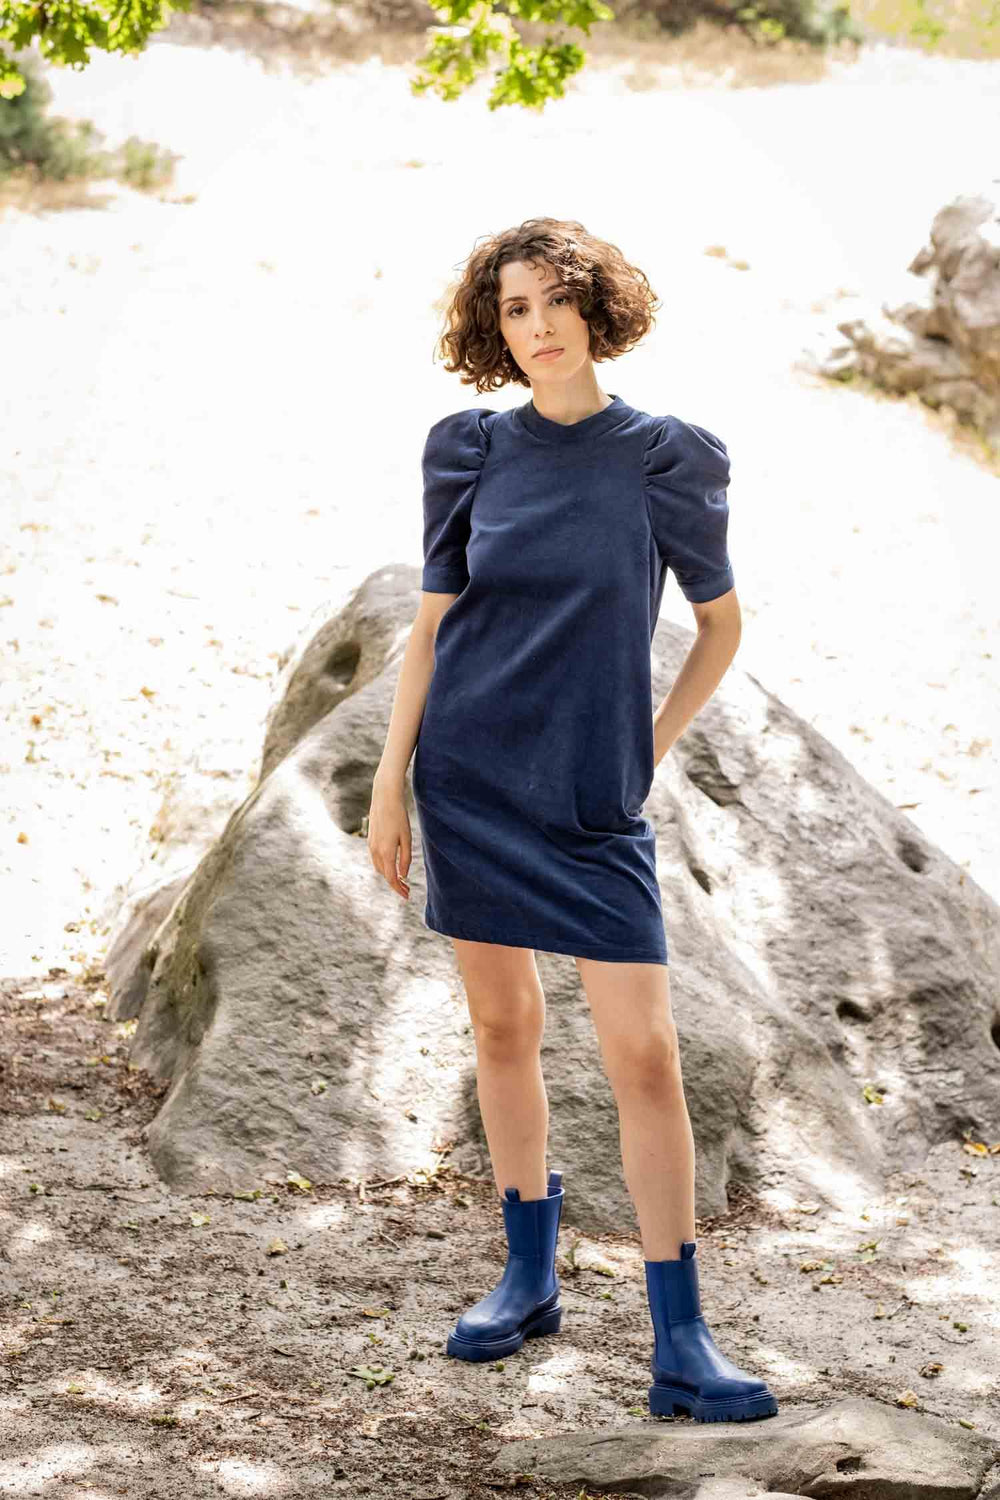 Woman wearing the Dina Dress sewing pattern from Fibre Mood on The Fold Line. A dress pattern made in corduroy, denim, poplin, leather(ette), viscose (crepe), lyocell or satin fabrics, featuring bust darts, gathered short sleeves with deep pleats at the t